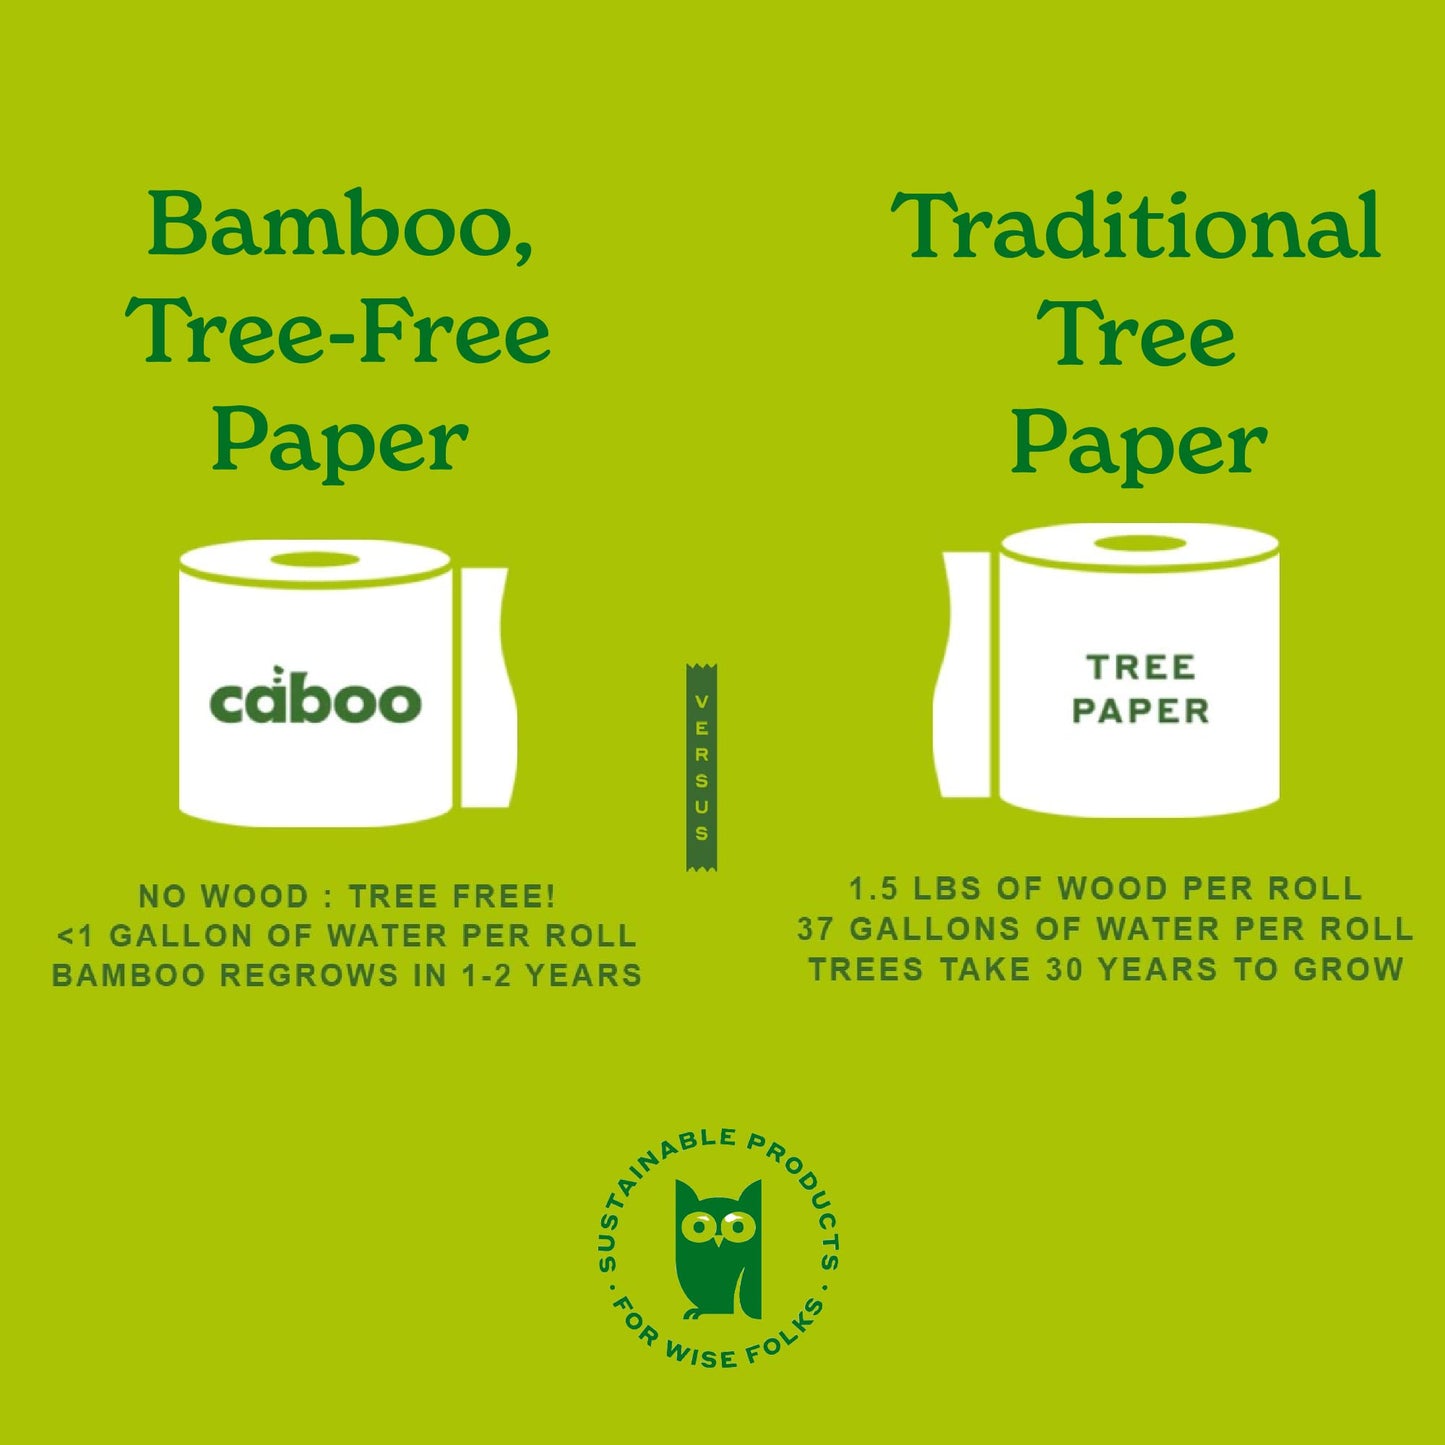 Caboo Tree Free Toilet Paper, Tree Free, Septic, Safe Biodegradable, Chemical Free Bath Tissue - 2 Ply Sheets, 300 Sheets Per Roll, 12 Double Rolls